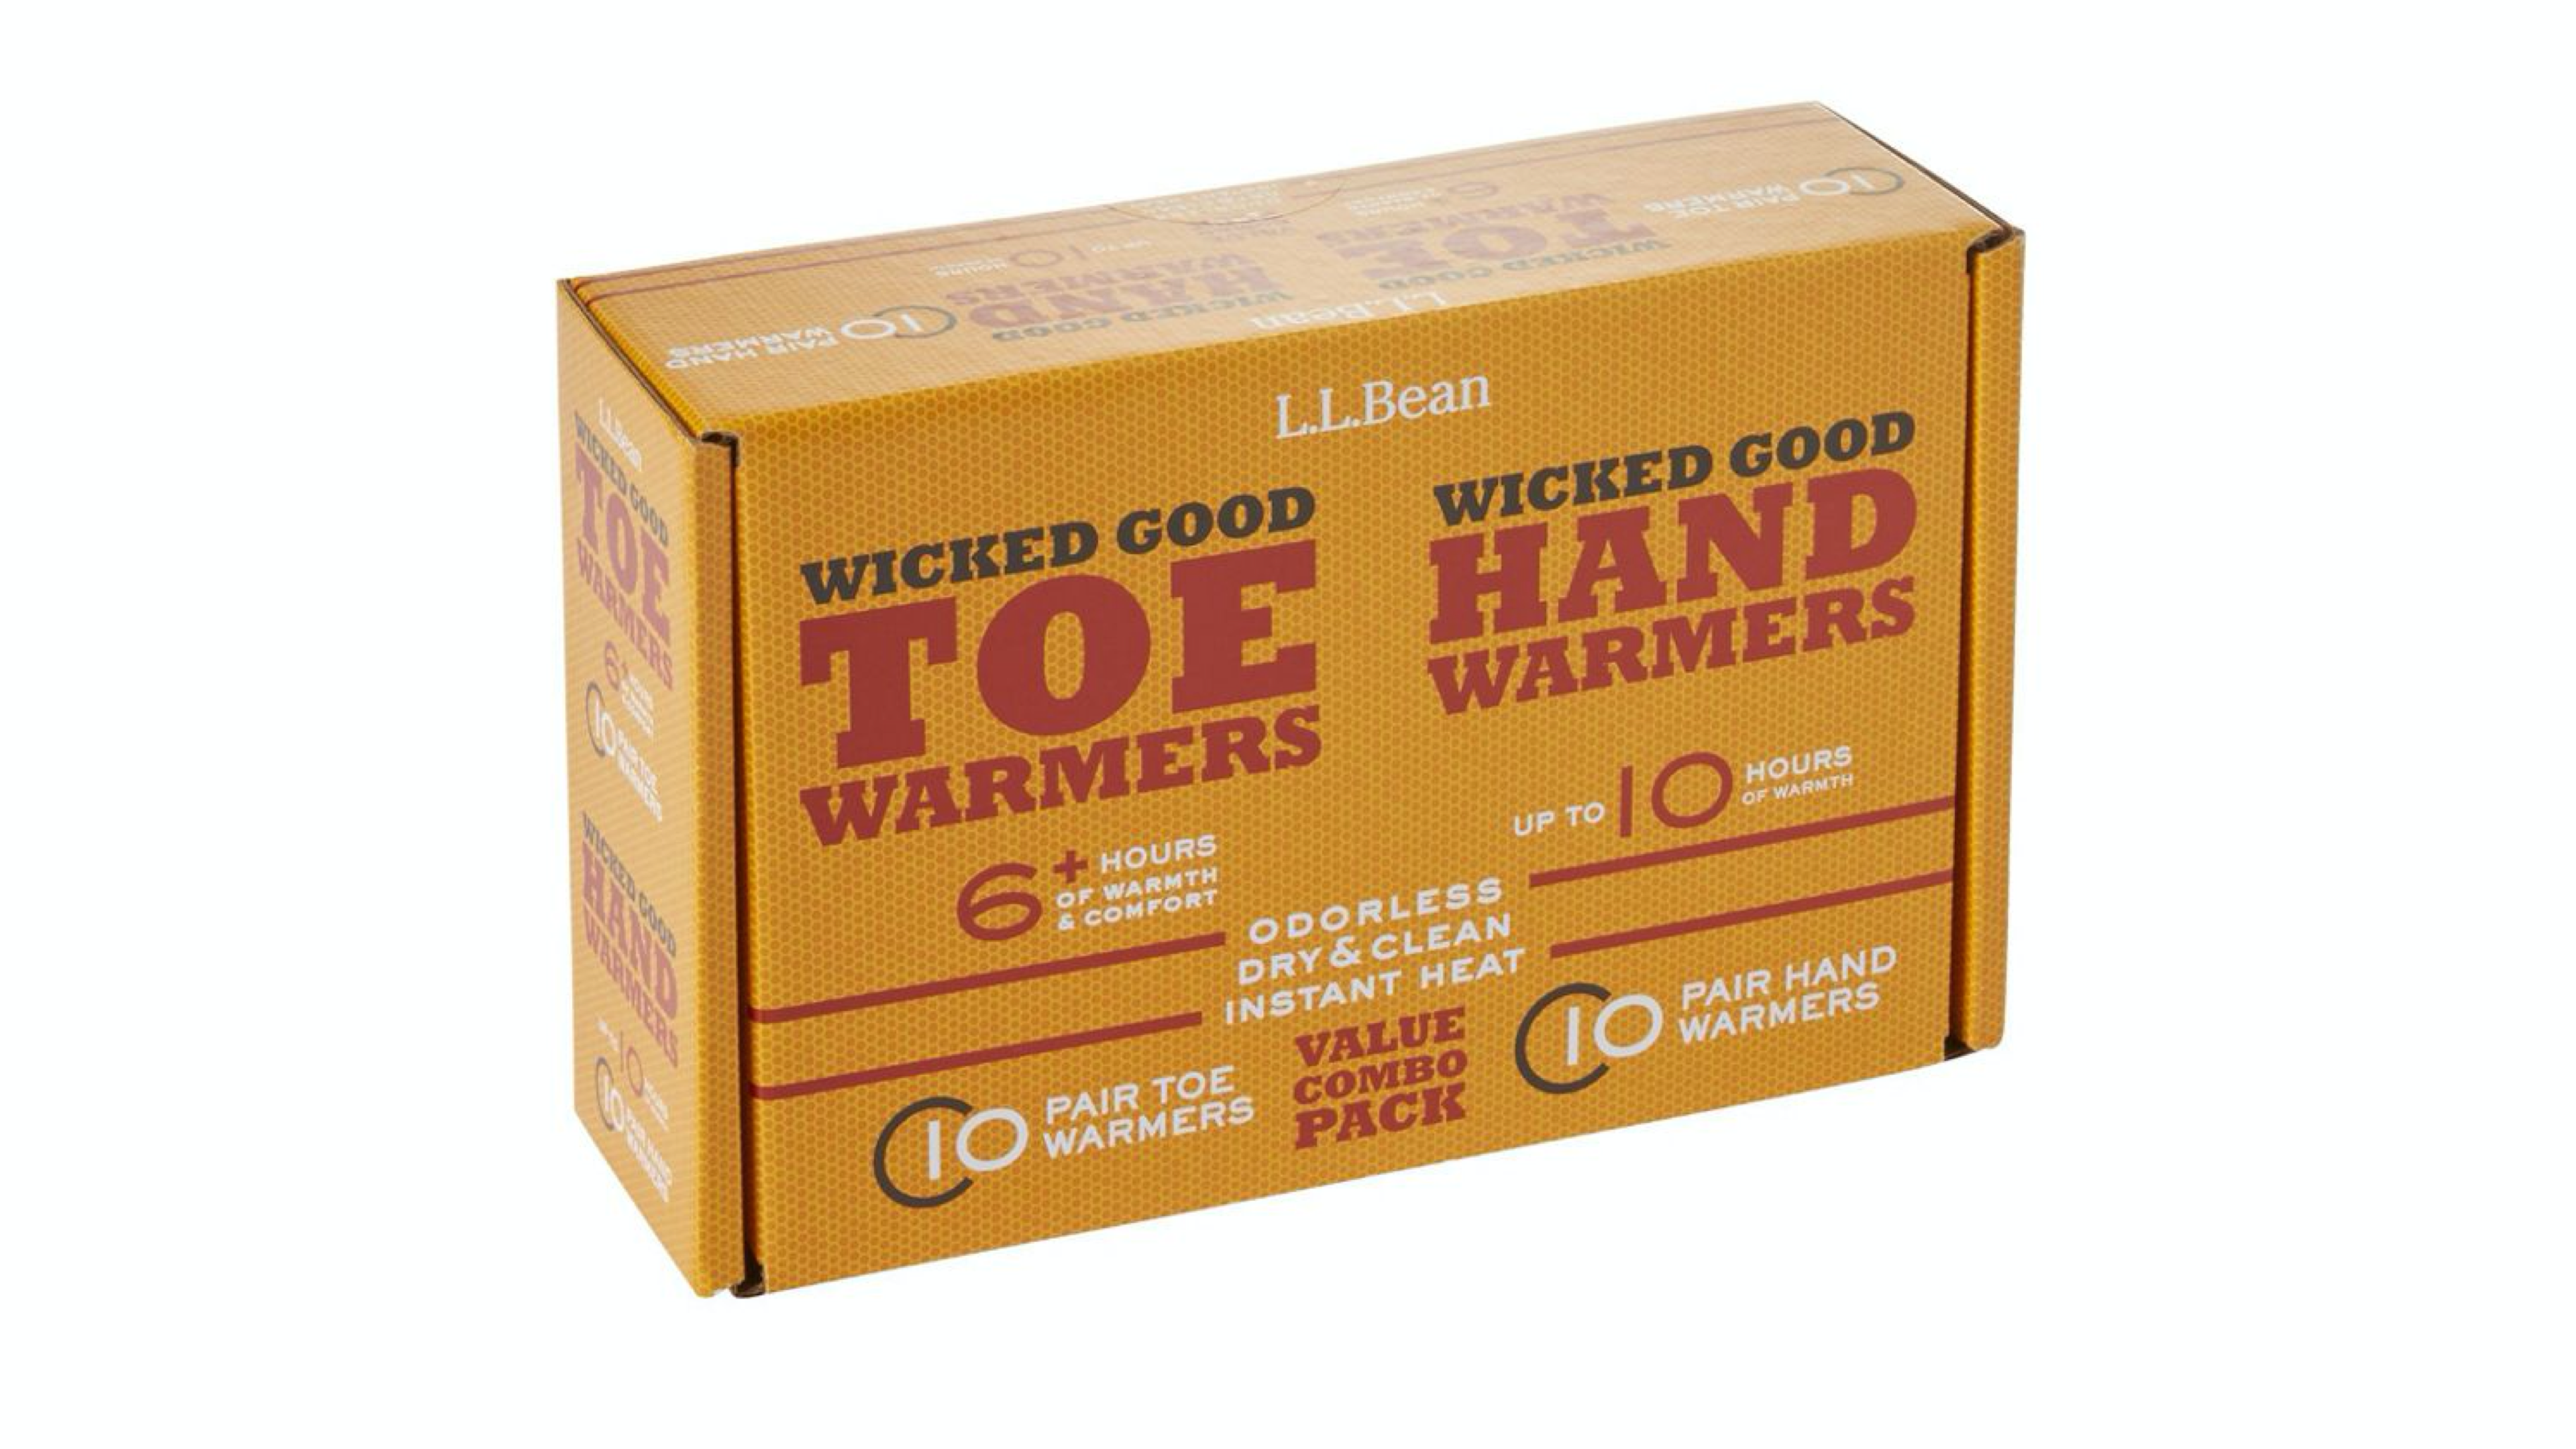 toe and hand warmer packets